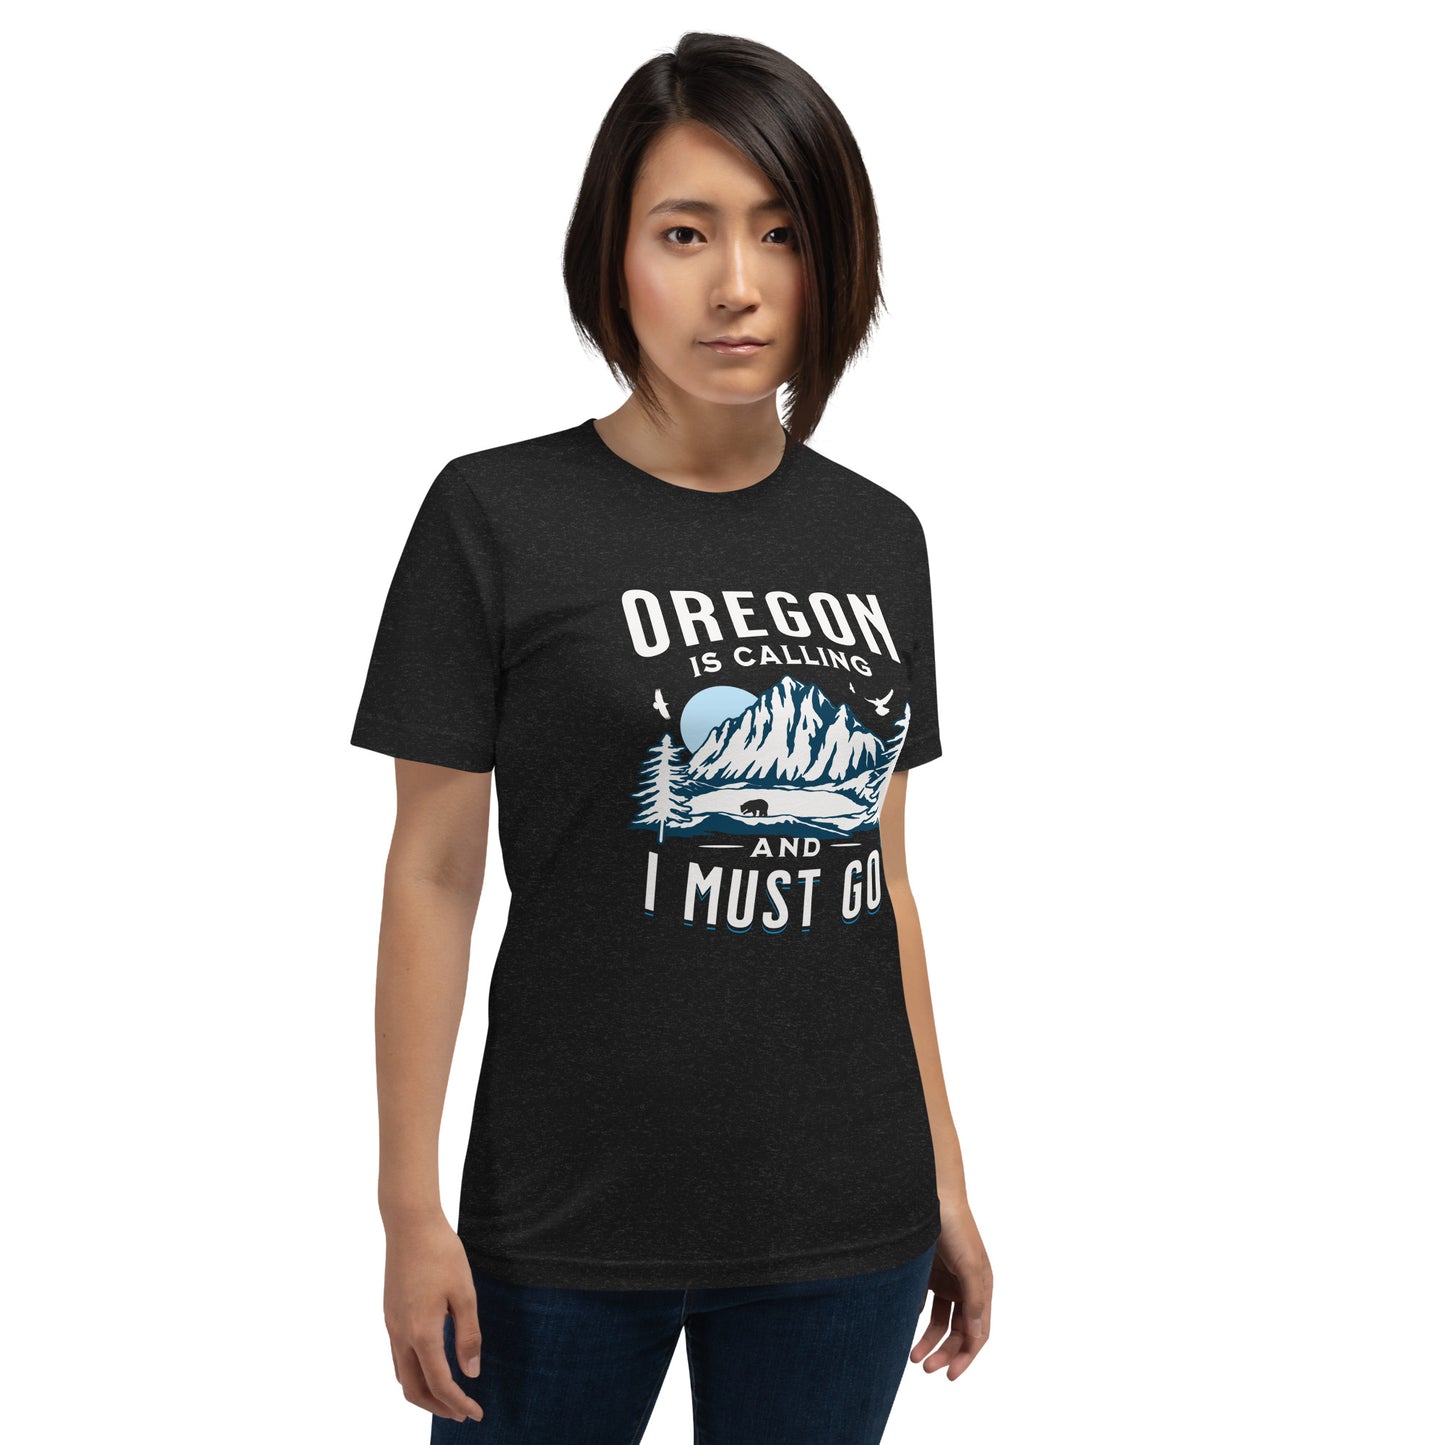 Oregon is Calling and I Must Go - Unisex t-shirt